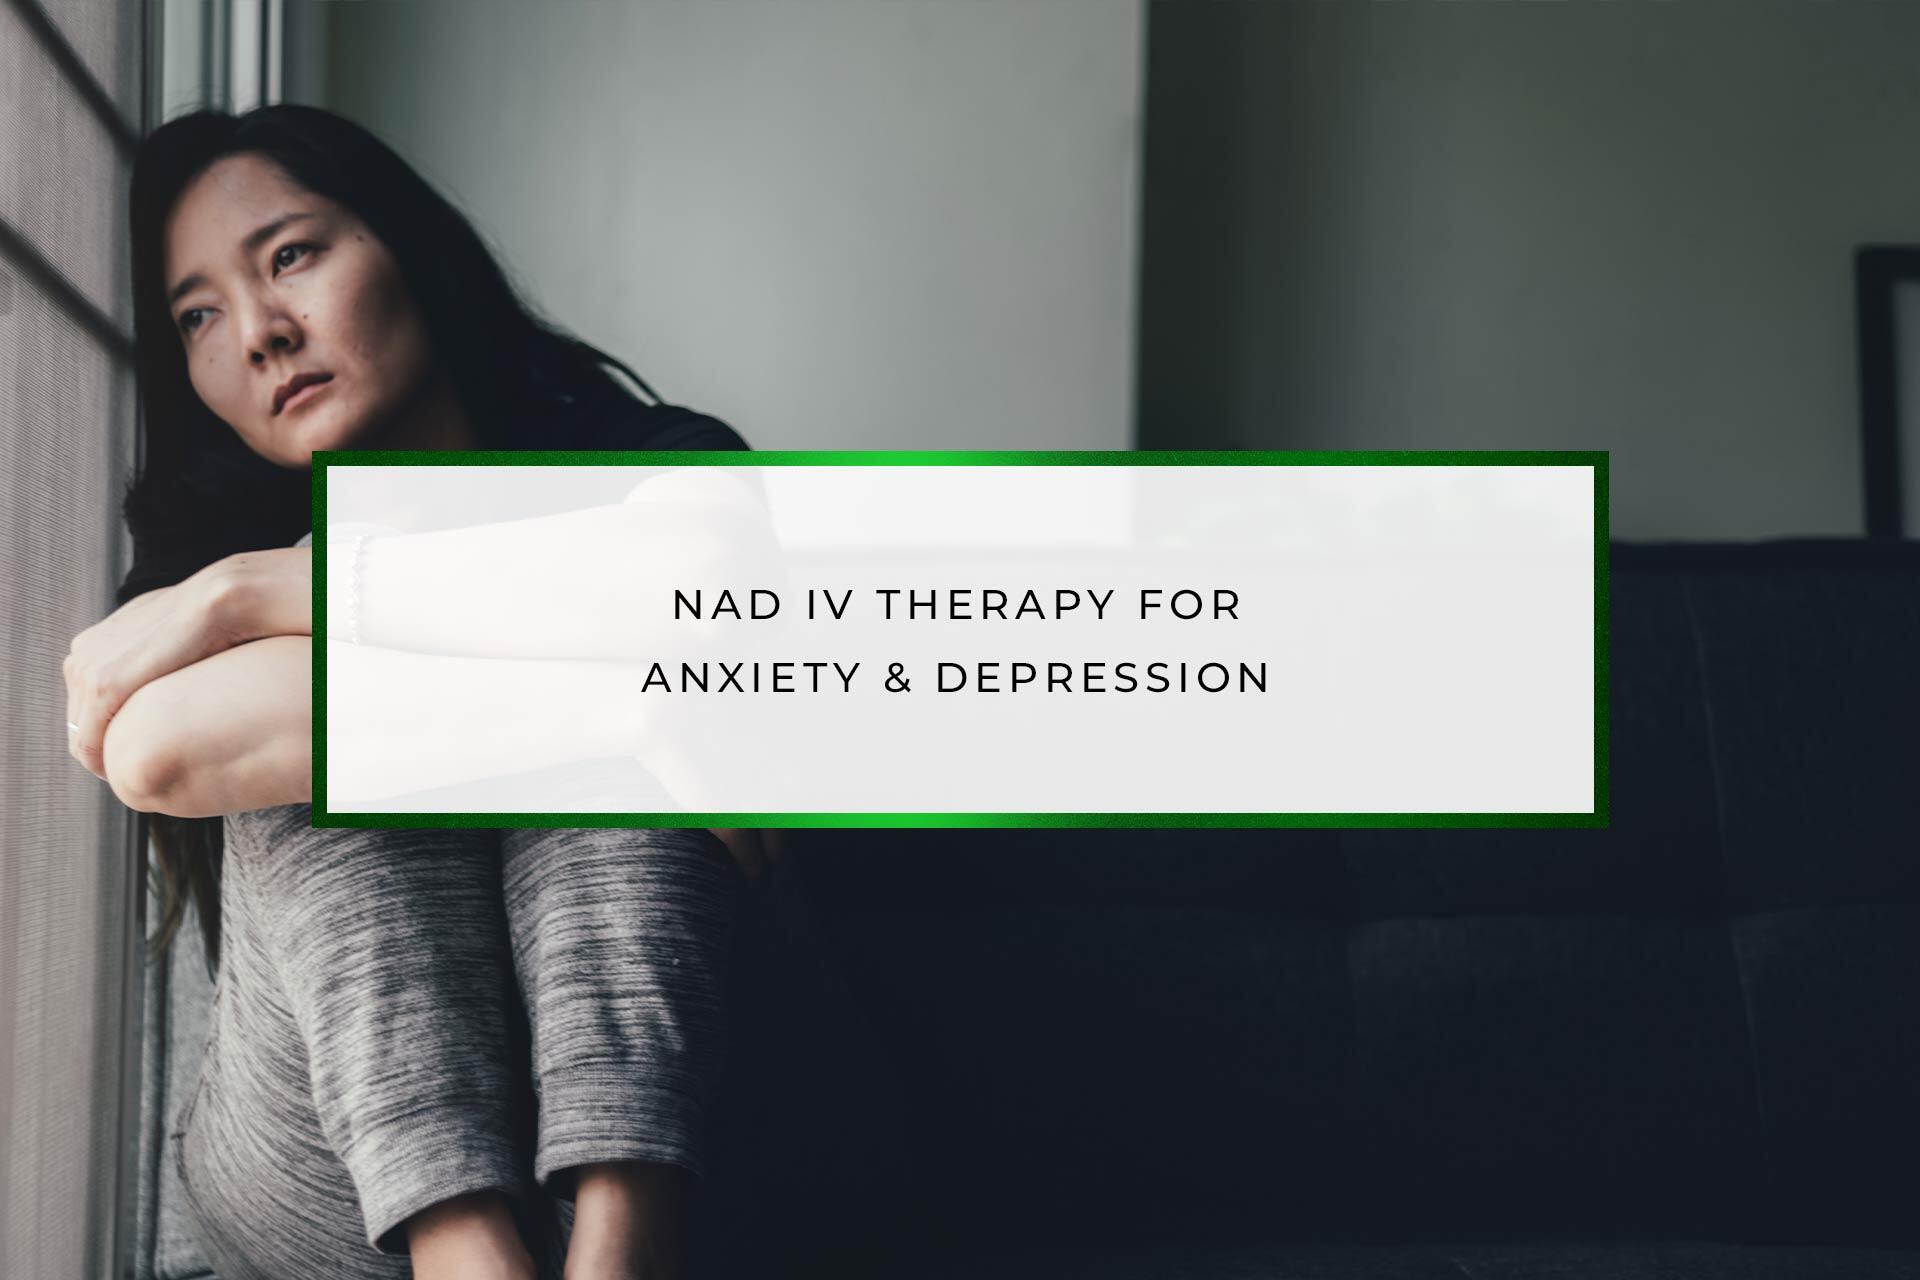 NAD IV Therapy for Anxiety & Depression | CryoFit